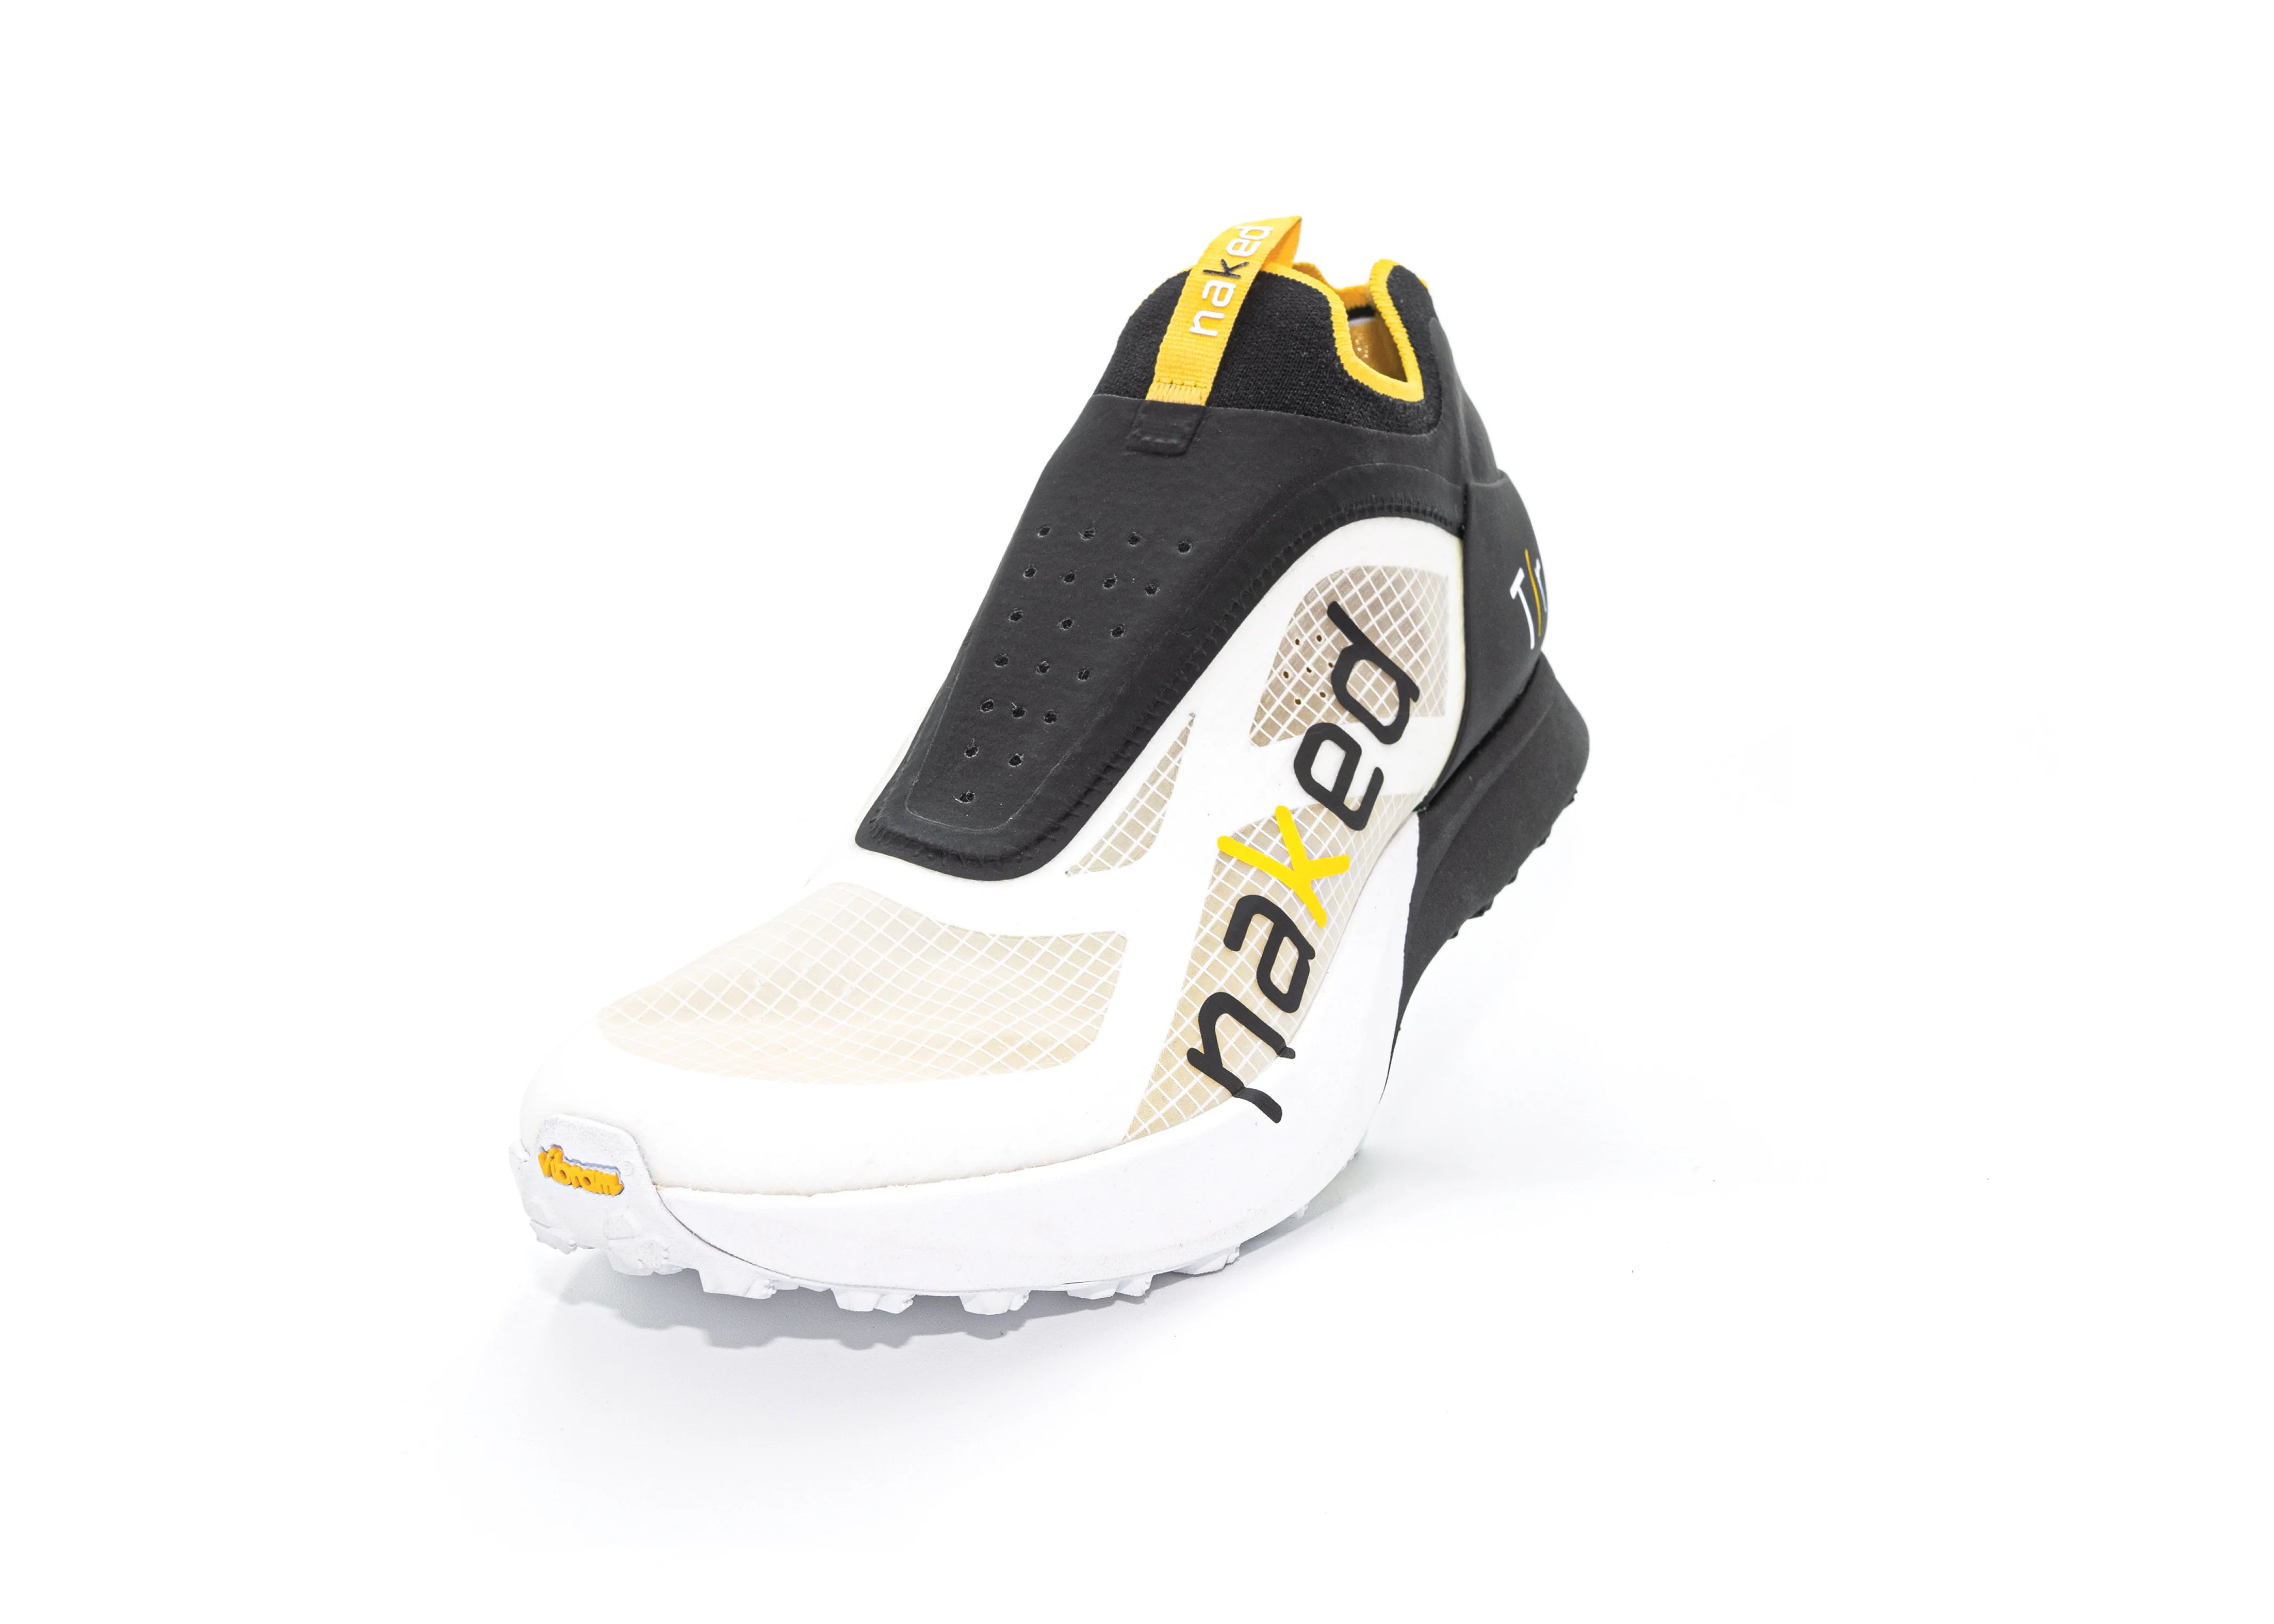 NAKED T/r Trail Racing Shoe - Unisex - FINAL SALE